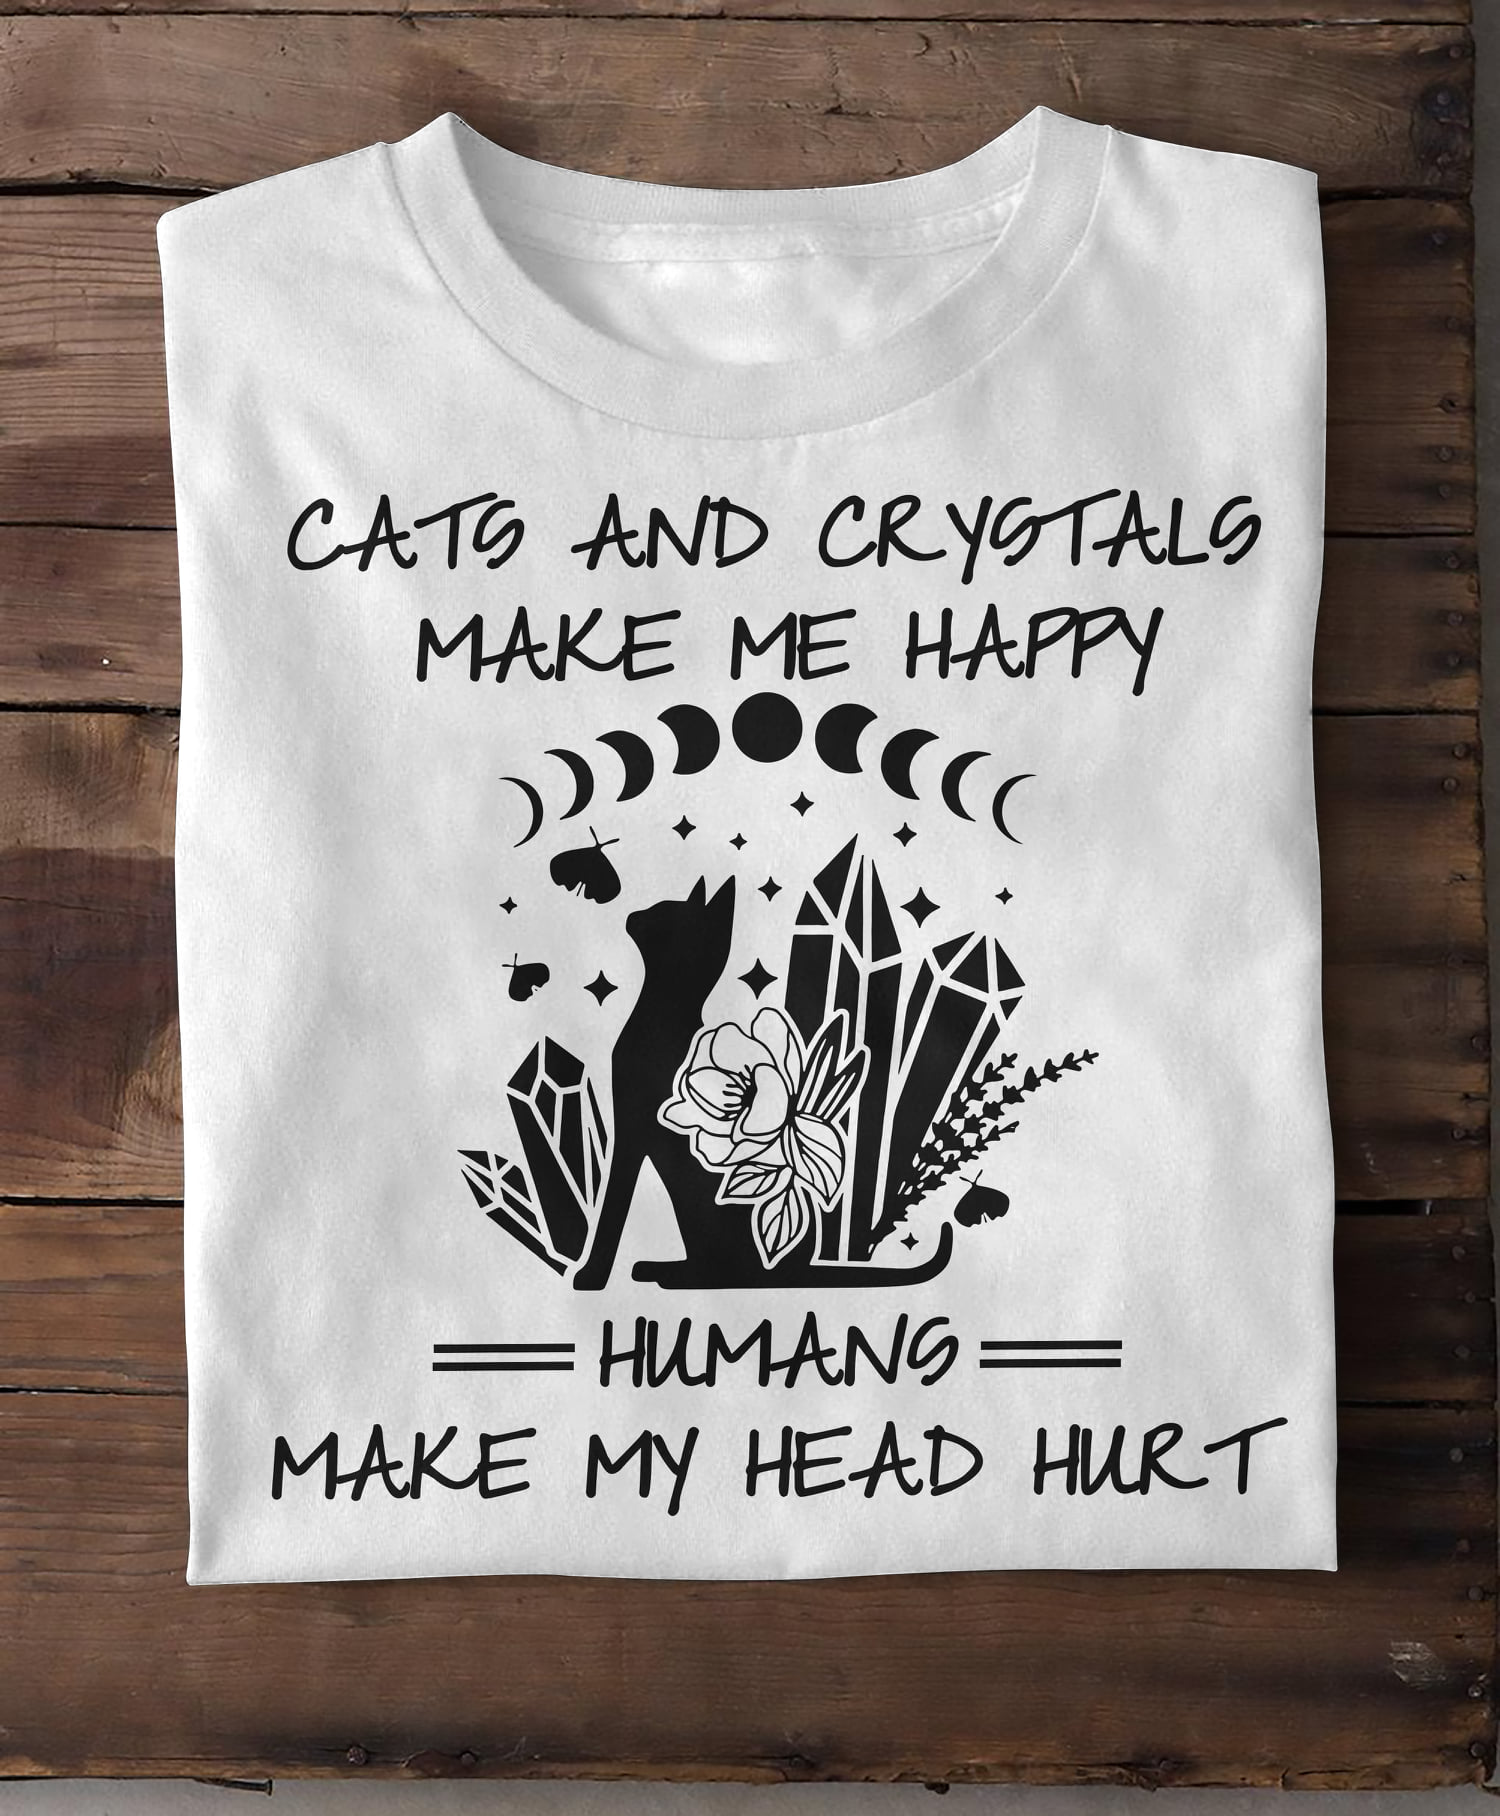 Cats and crystals make me happy humans make my head hurt - Crystal lover